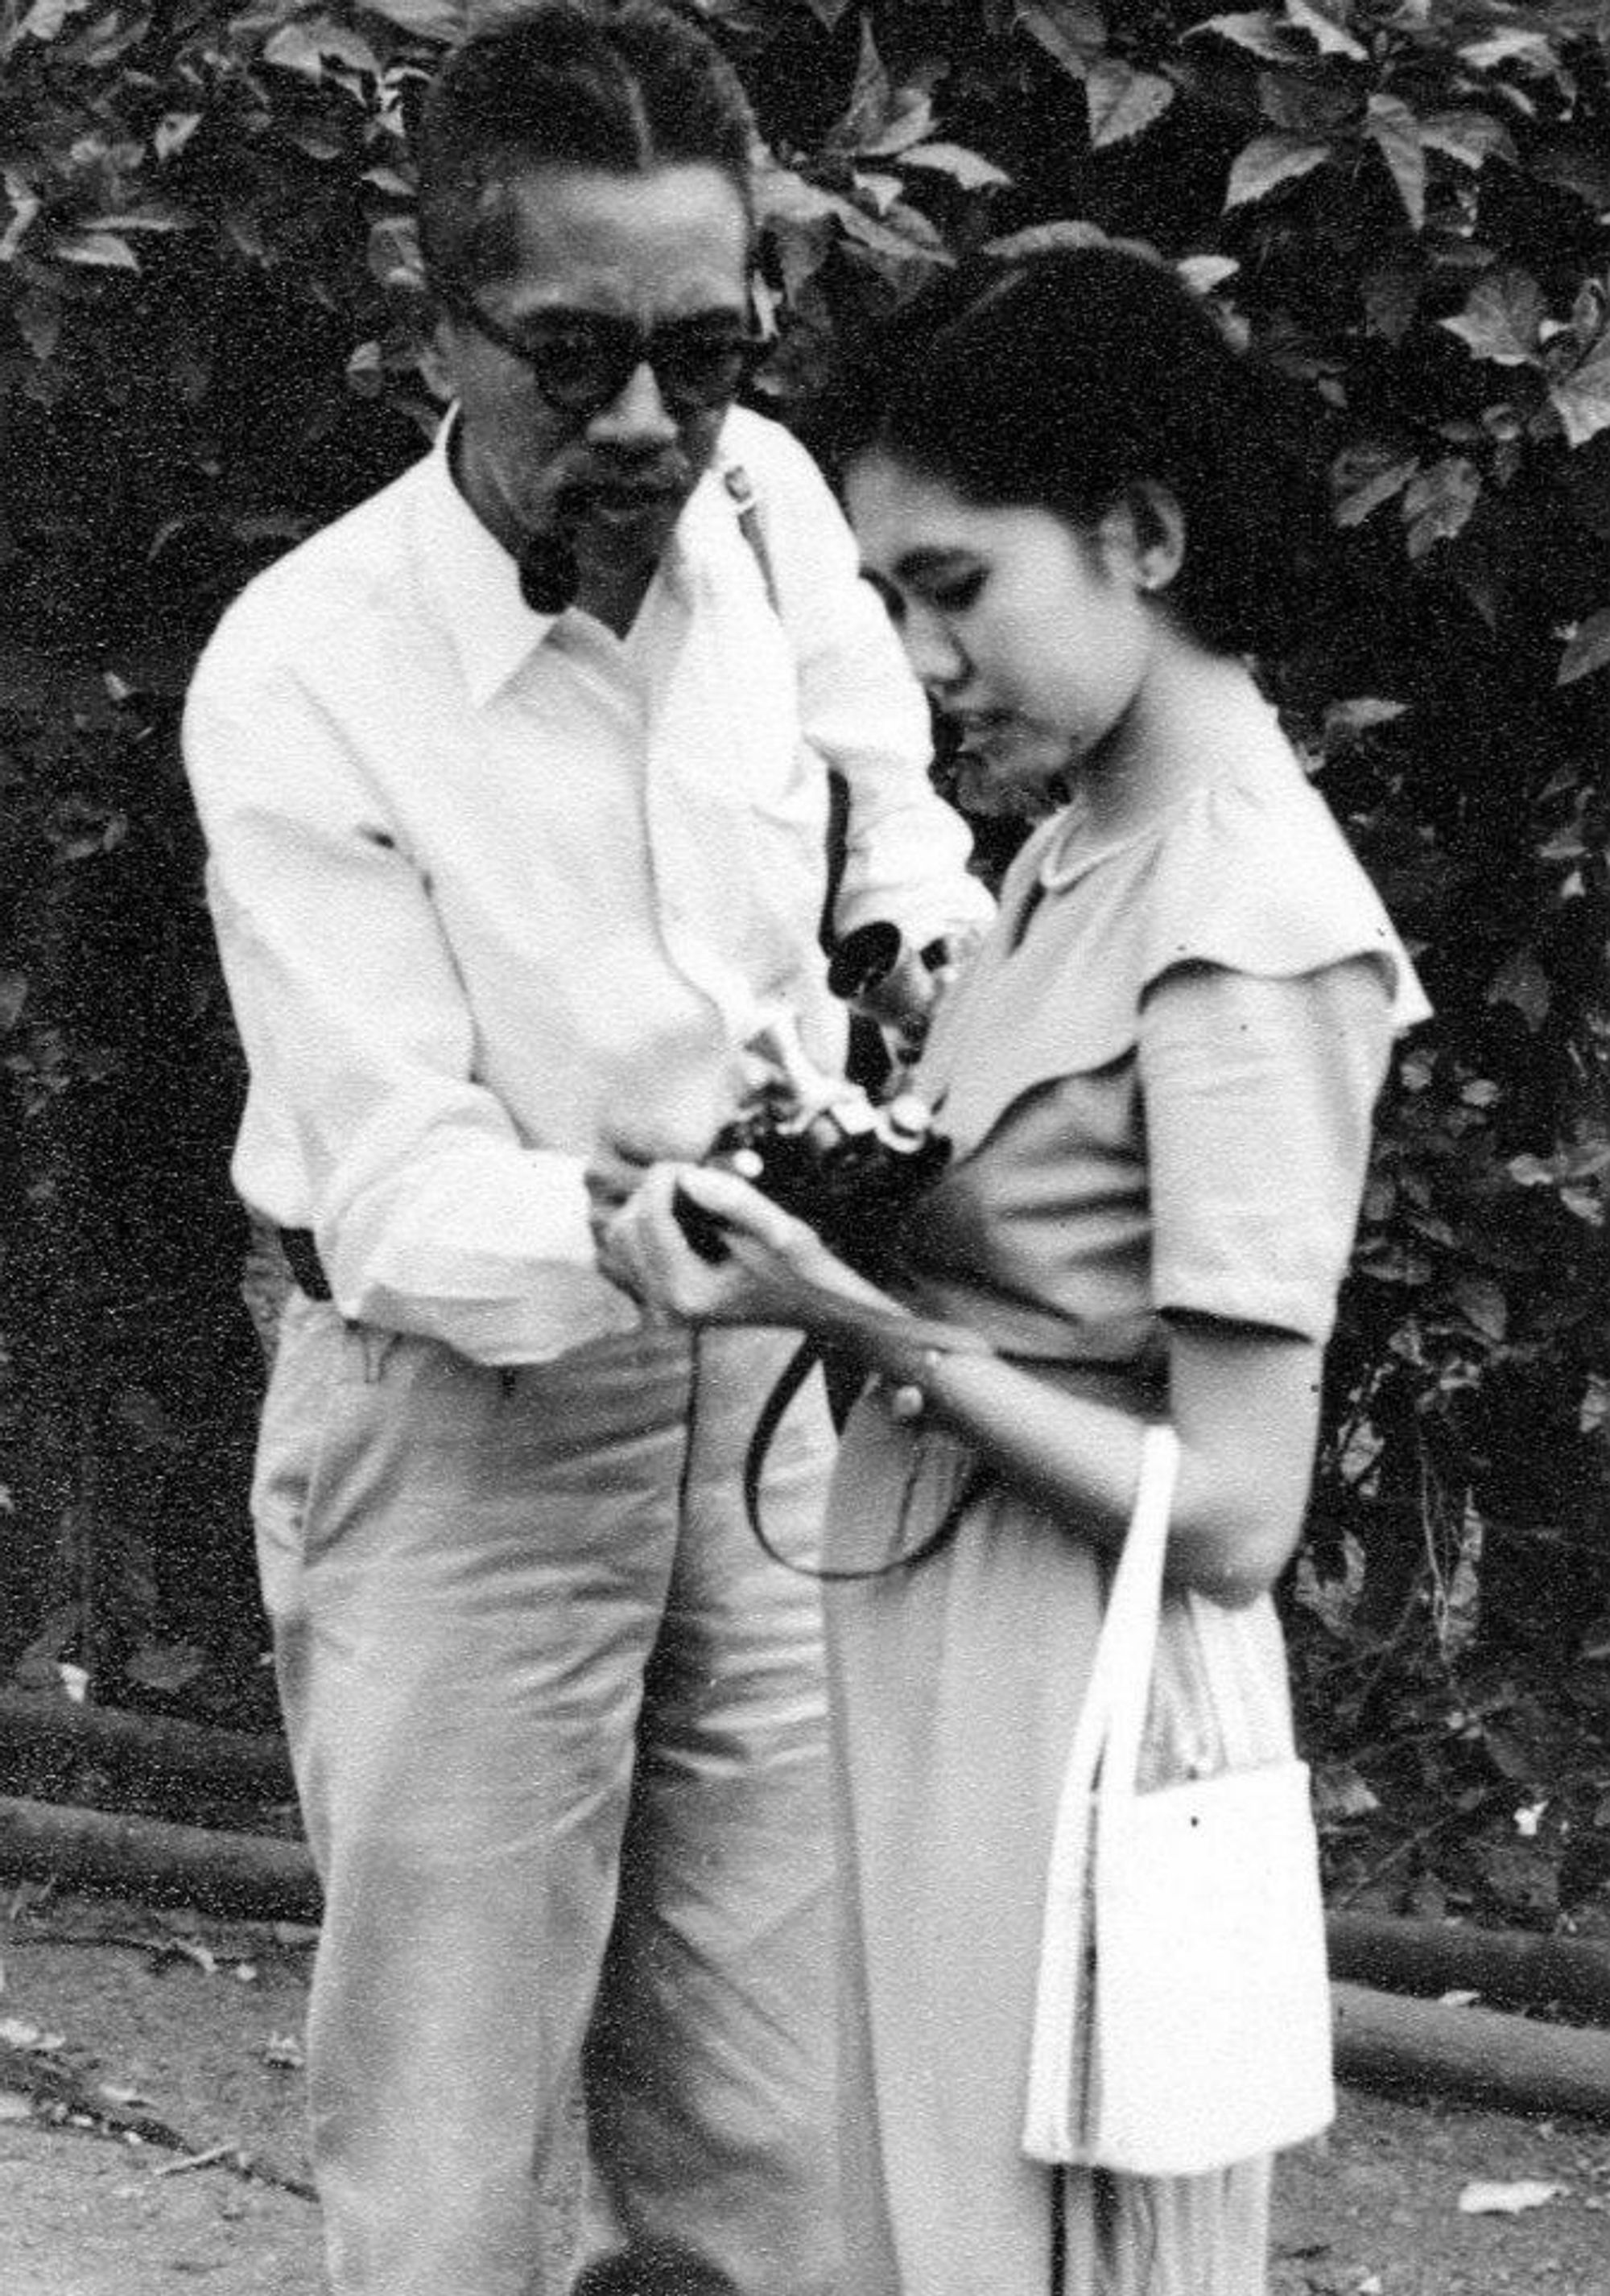 A black-and-white photograph of Protomartir and a woman sitting a camera that the woman is holding. He is wearing sunglasses and a white button-up shirt. She is wearing a short-sleeve dress and what looks to be a pearl necklace.